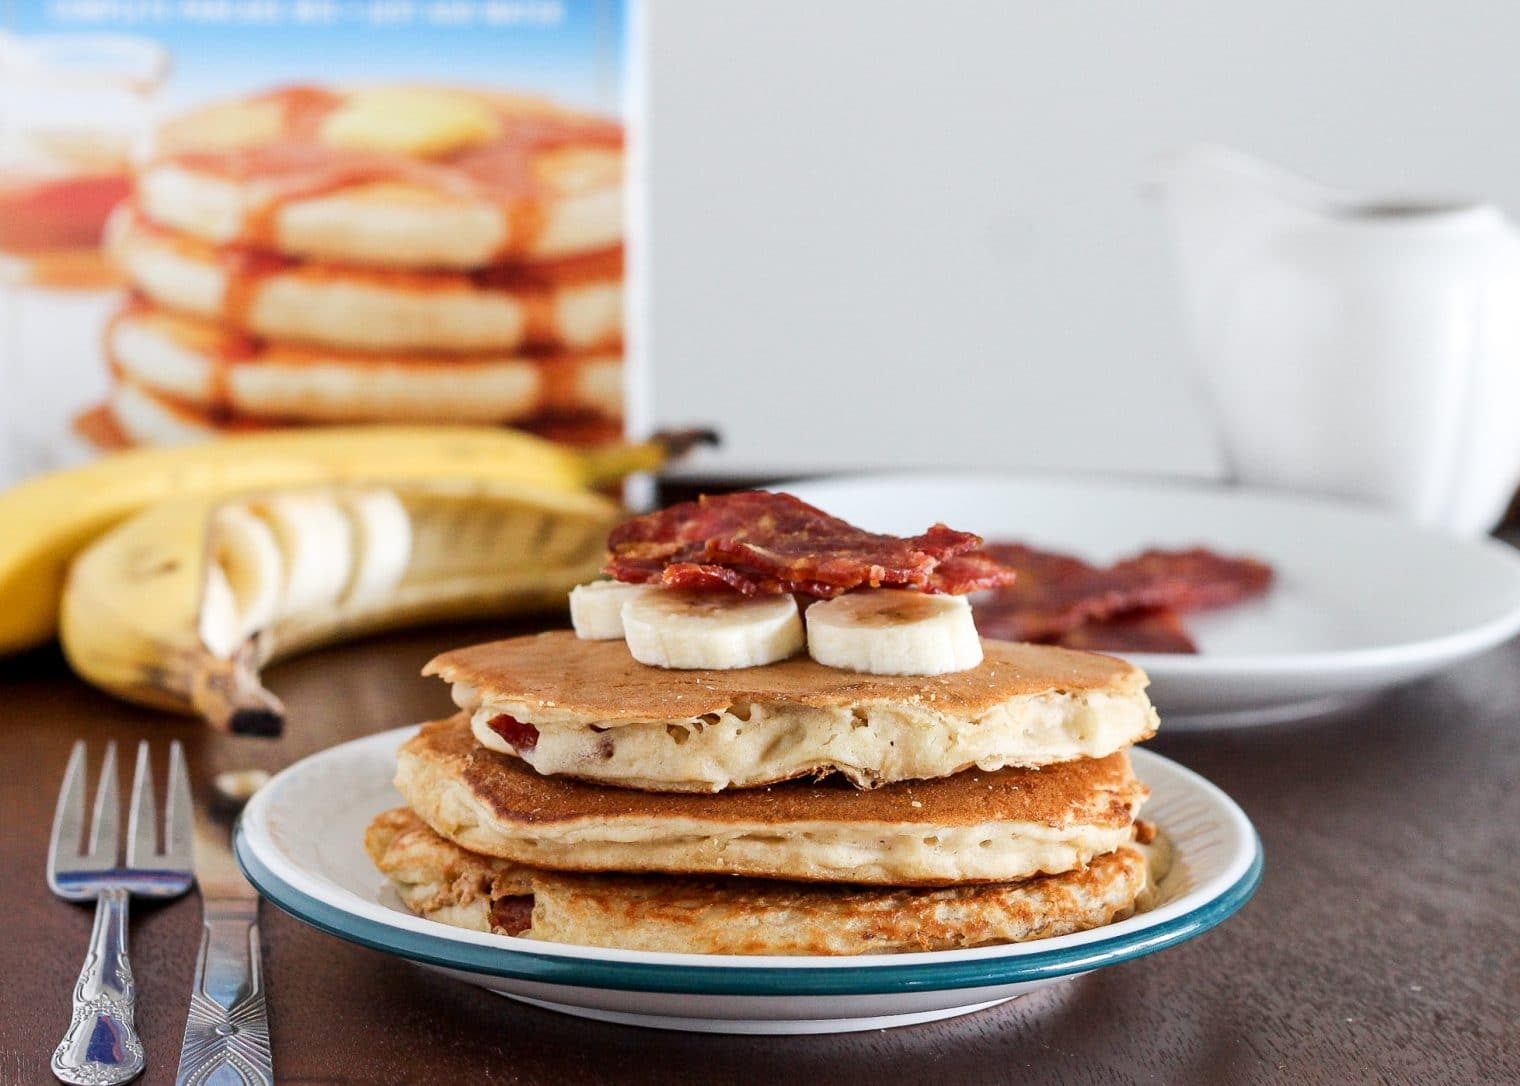 These Elvis Pancakes are banana peanut butter pancakes stuffed with peanut butter and bacon. These are the ultimate breakfast treat - made with only 4 ingredients!